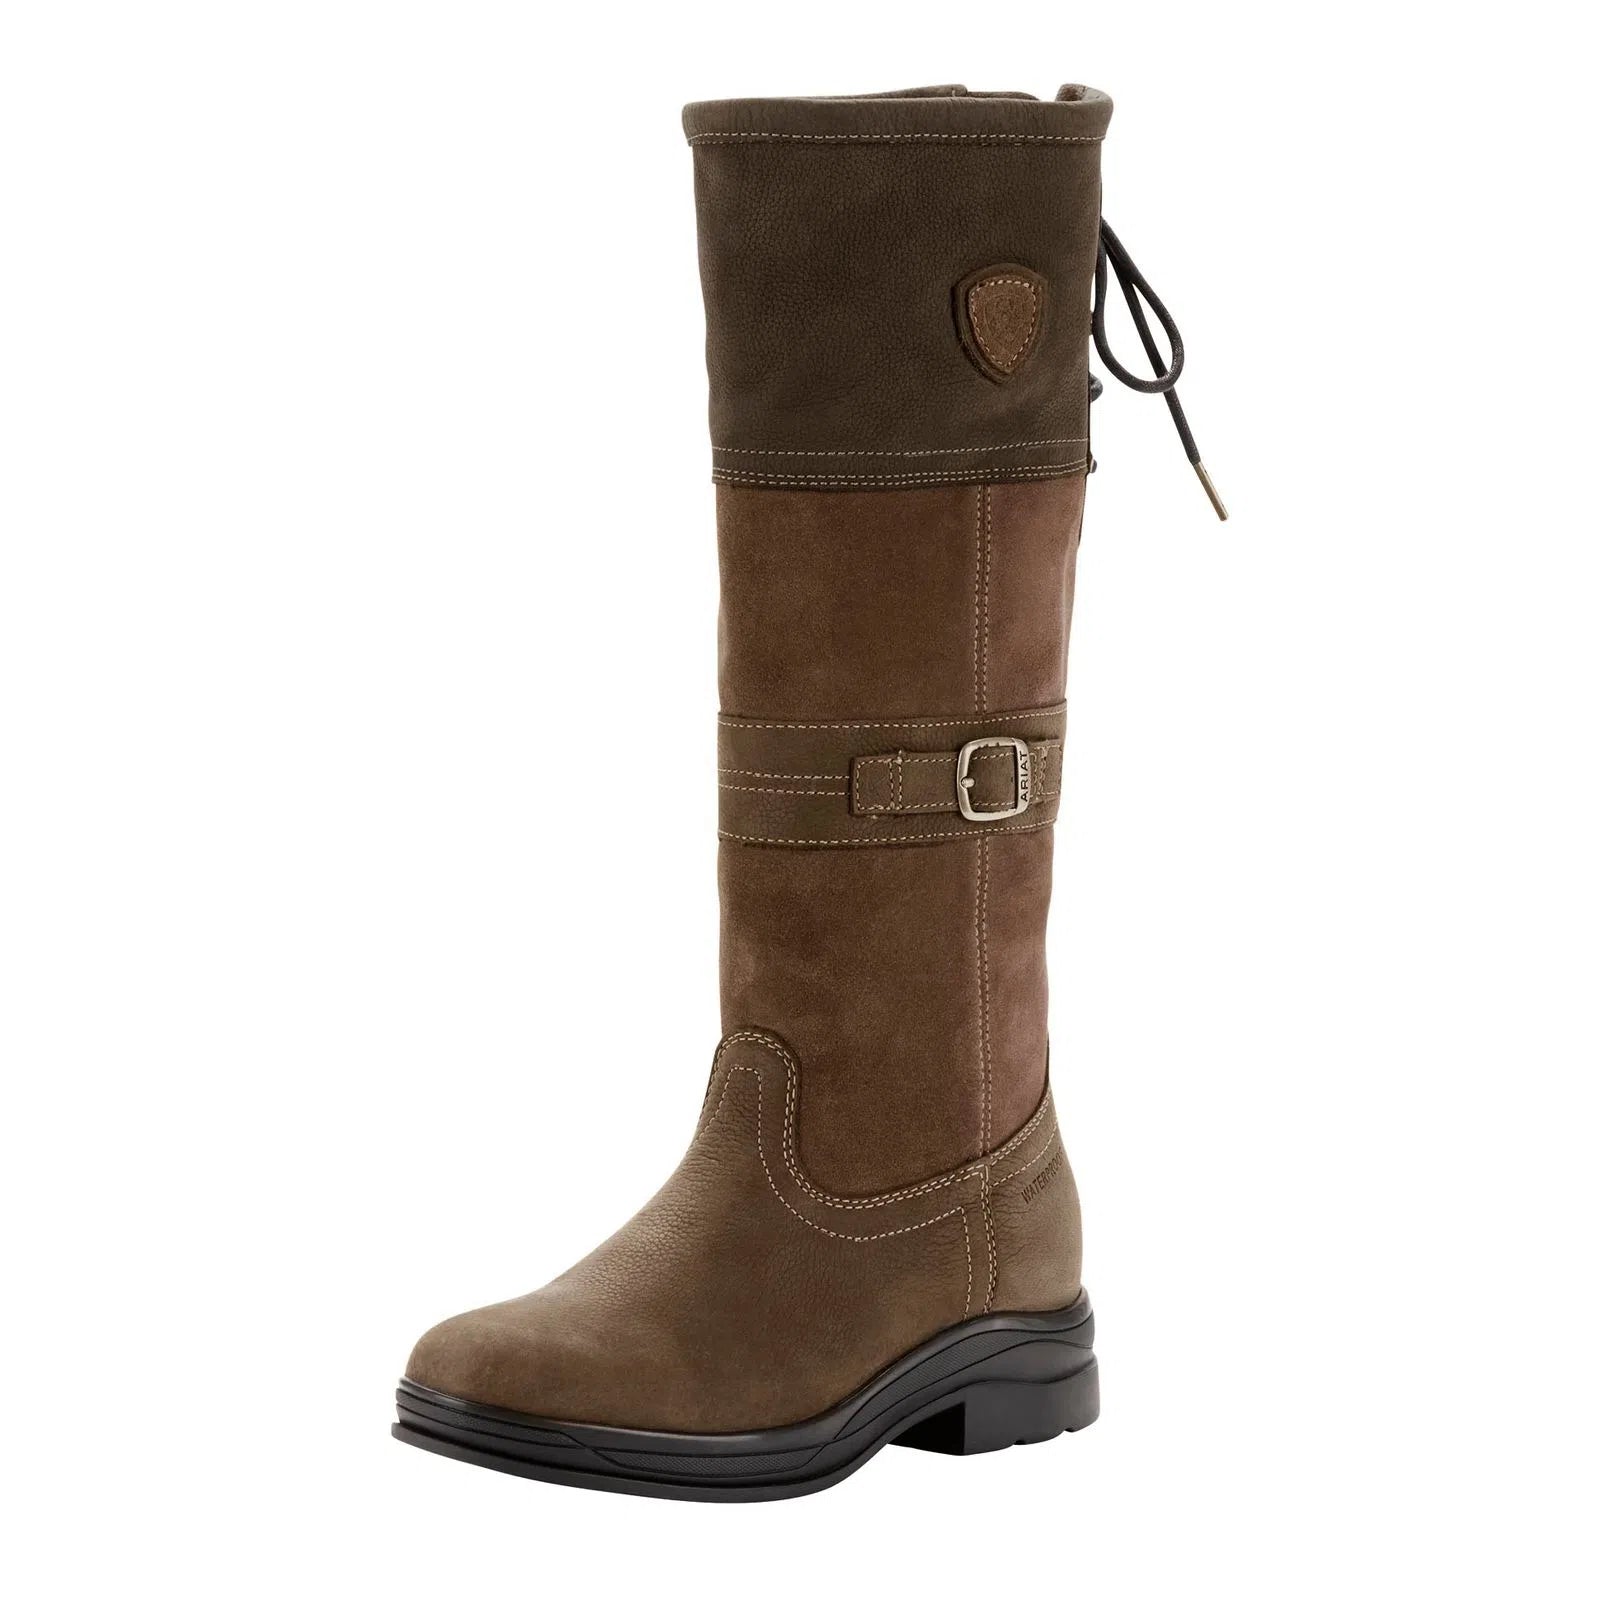 Ariat Women's Langdale H2O Boot - Waxed Chocolate